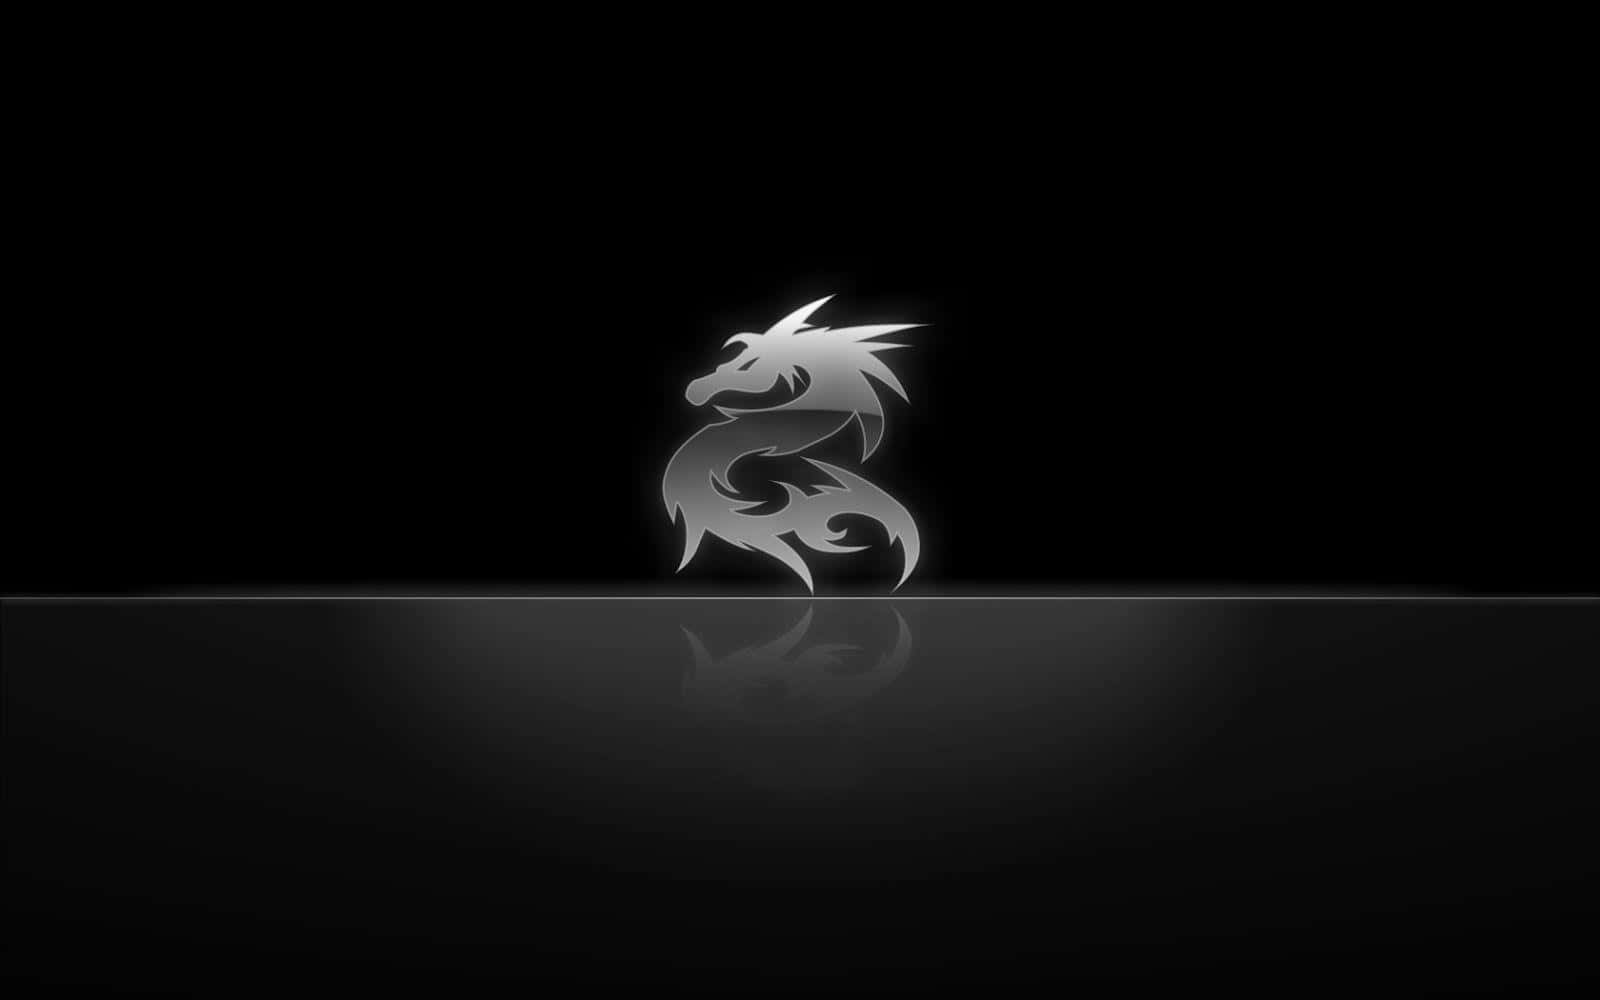 A Black And Silver Dragon Logo On A Black Background Wallpaper